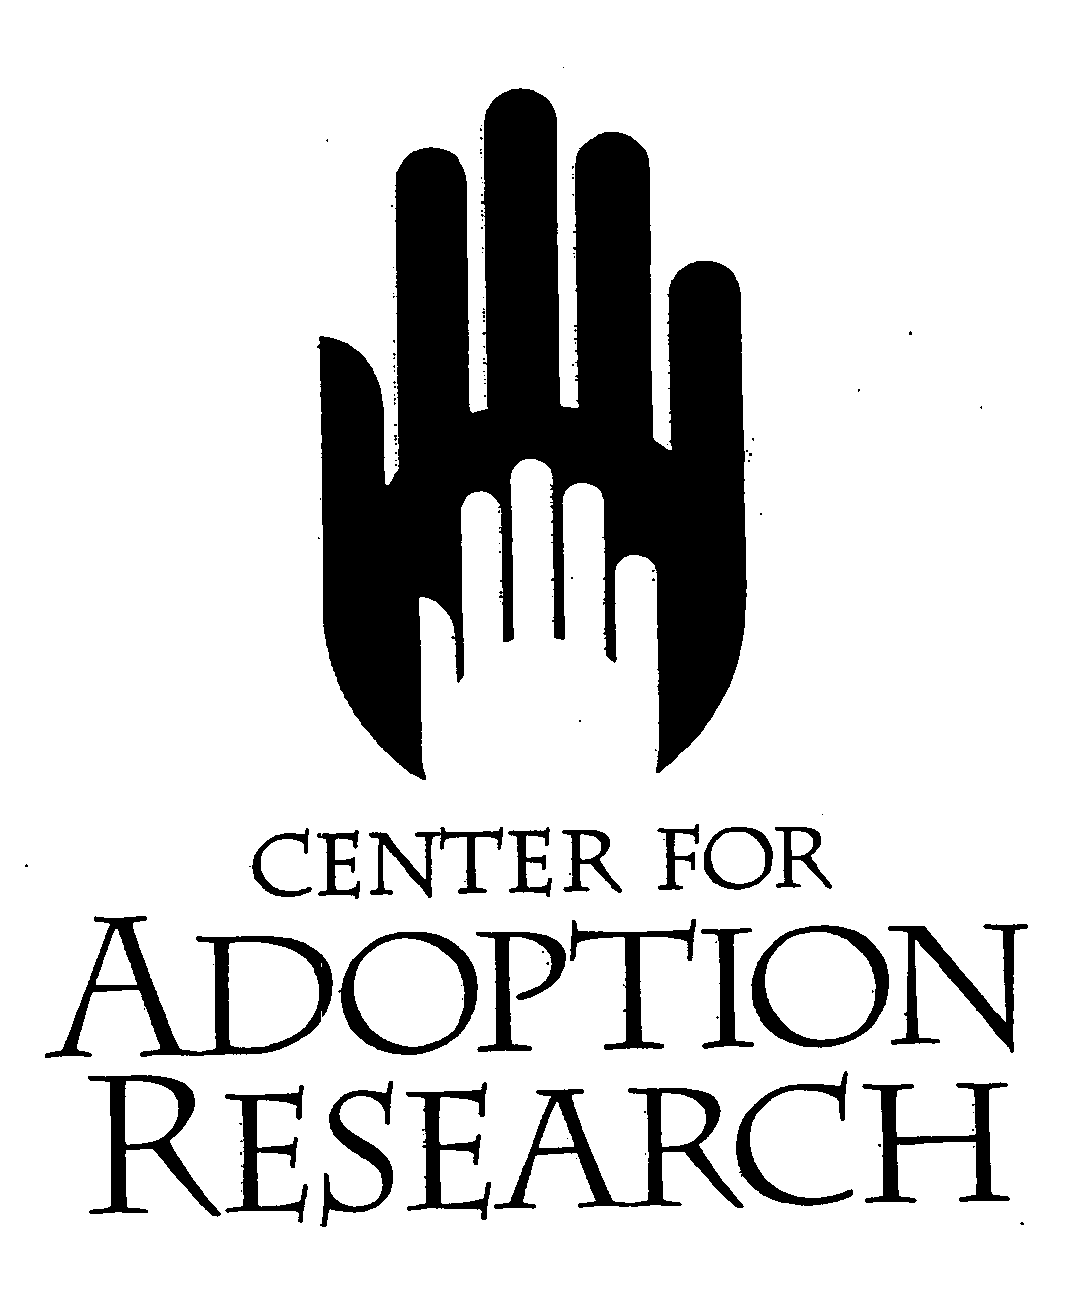  CENTER FOR ADOPTION RESEARCH